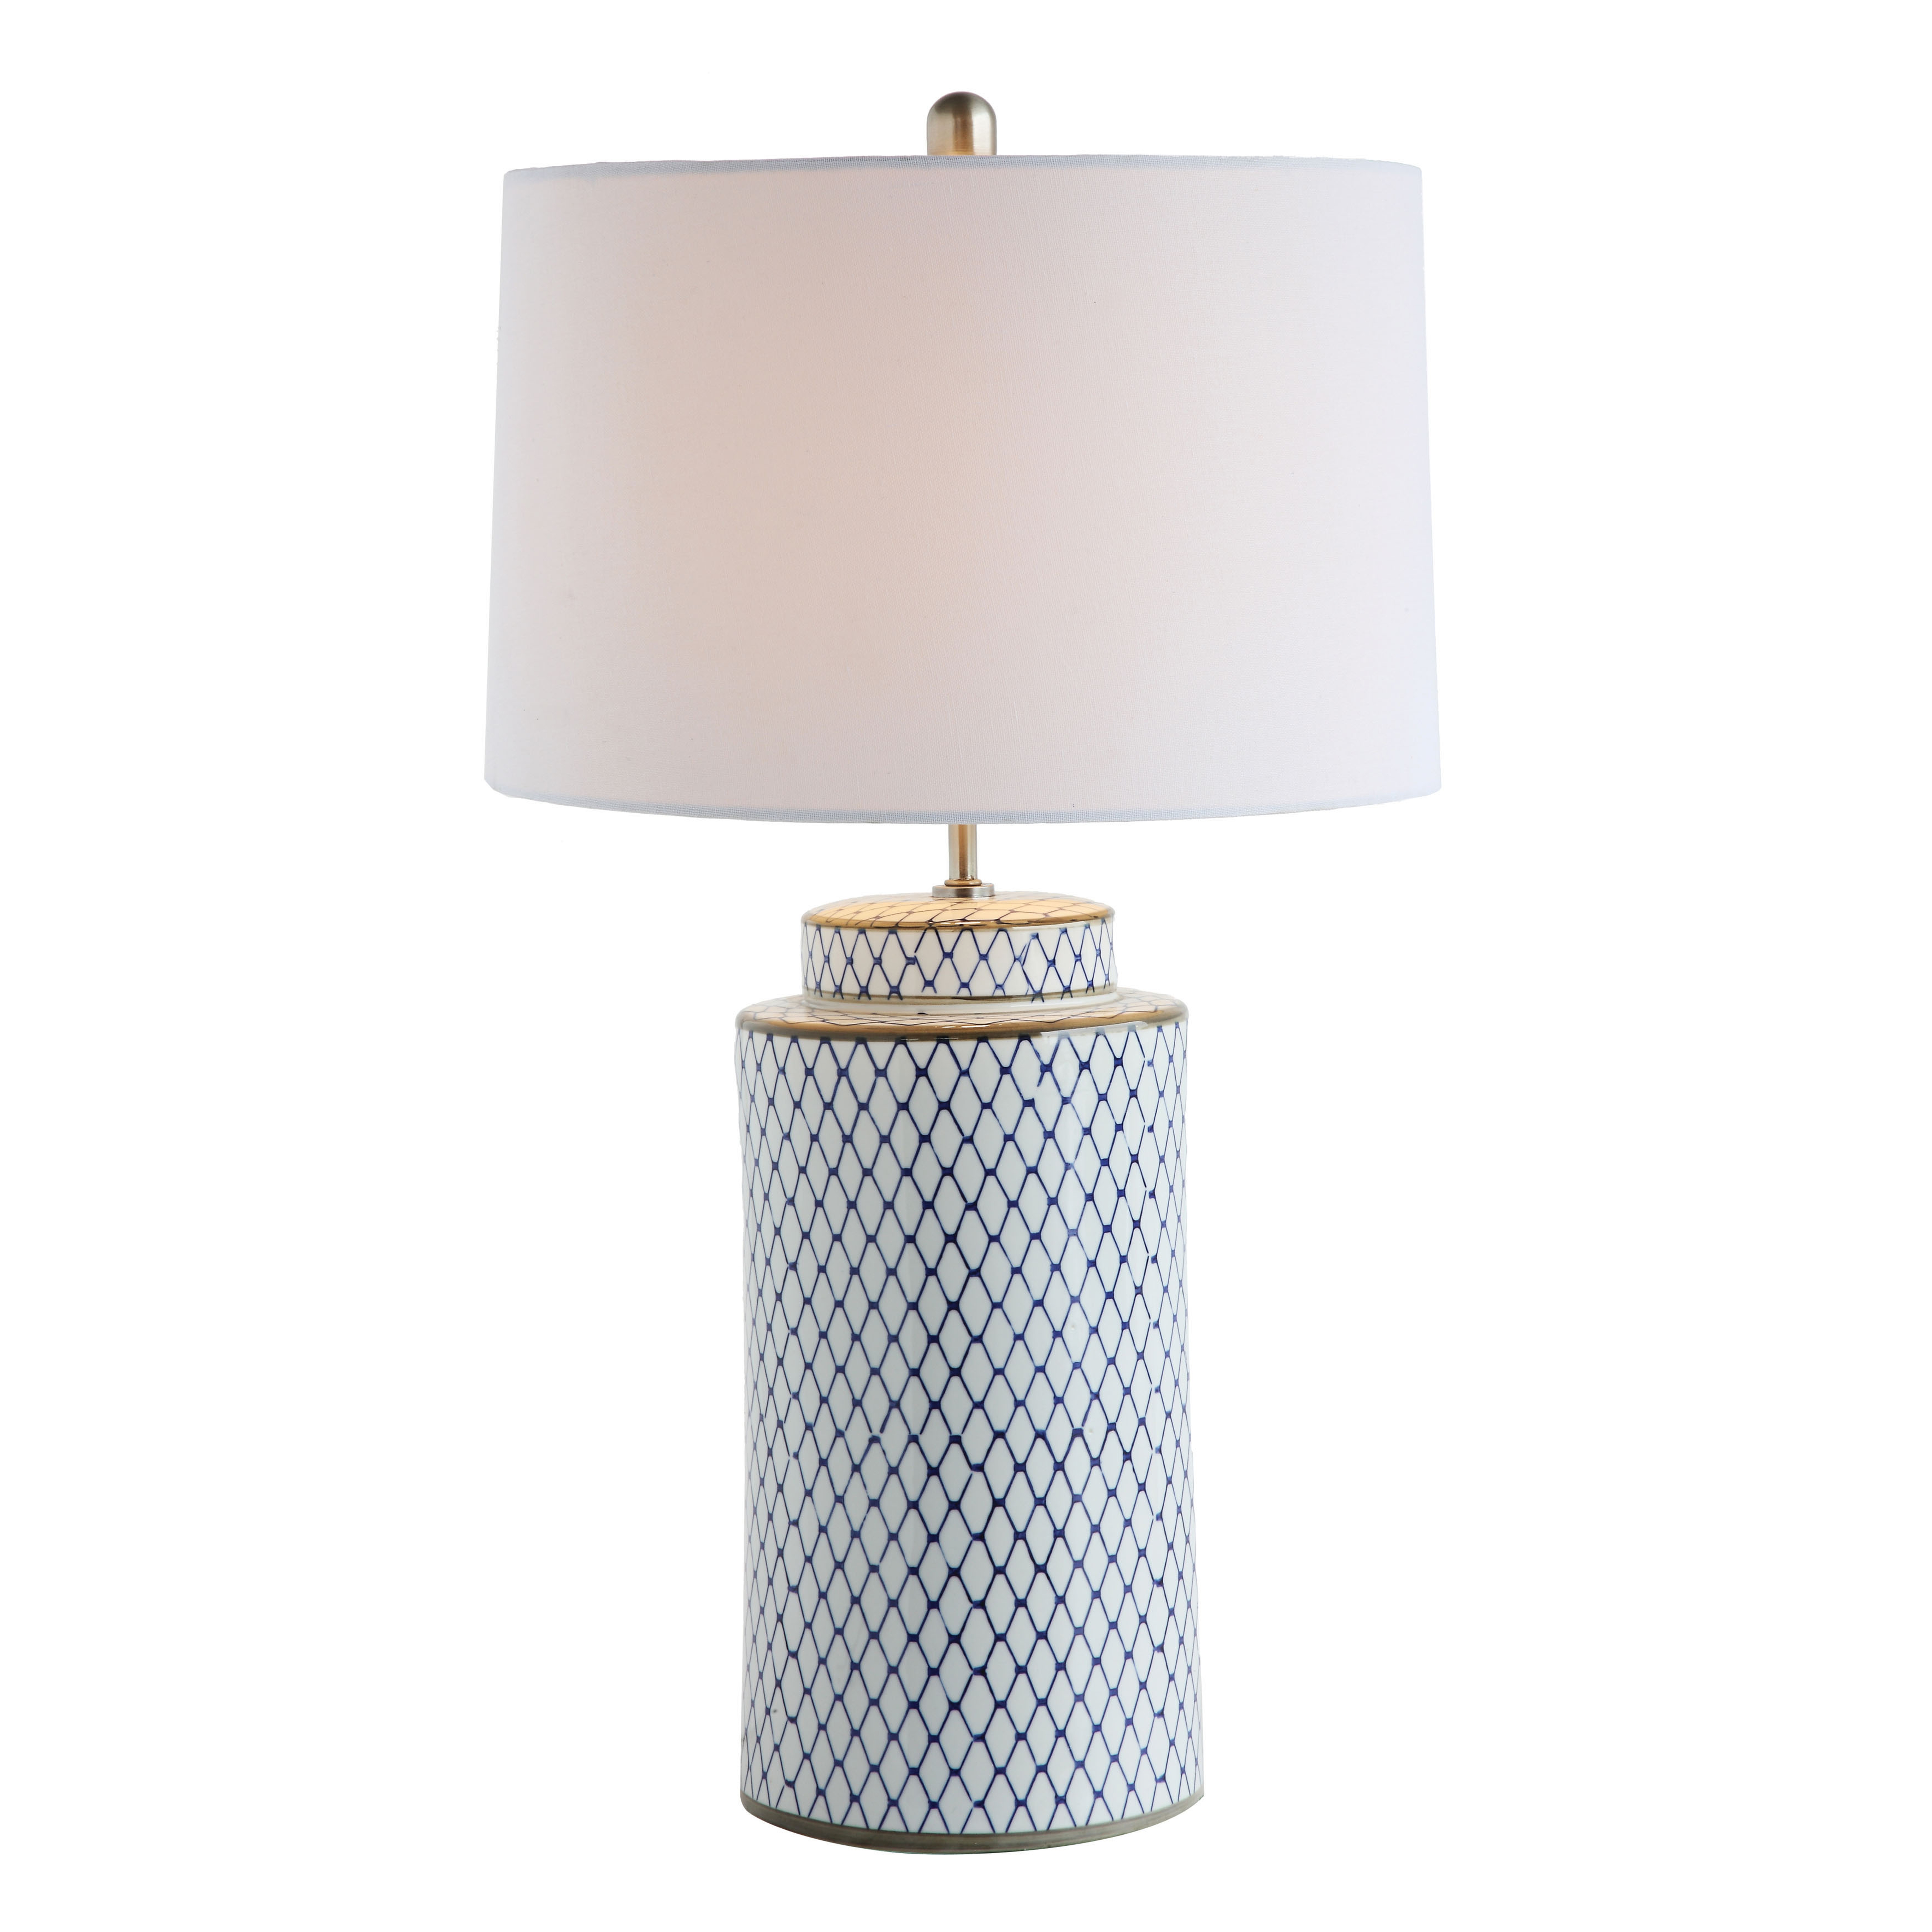 Ceramic Table lamp with Linen Shade, Indigo & White - Nomad Home